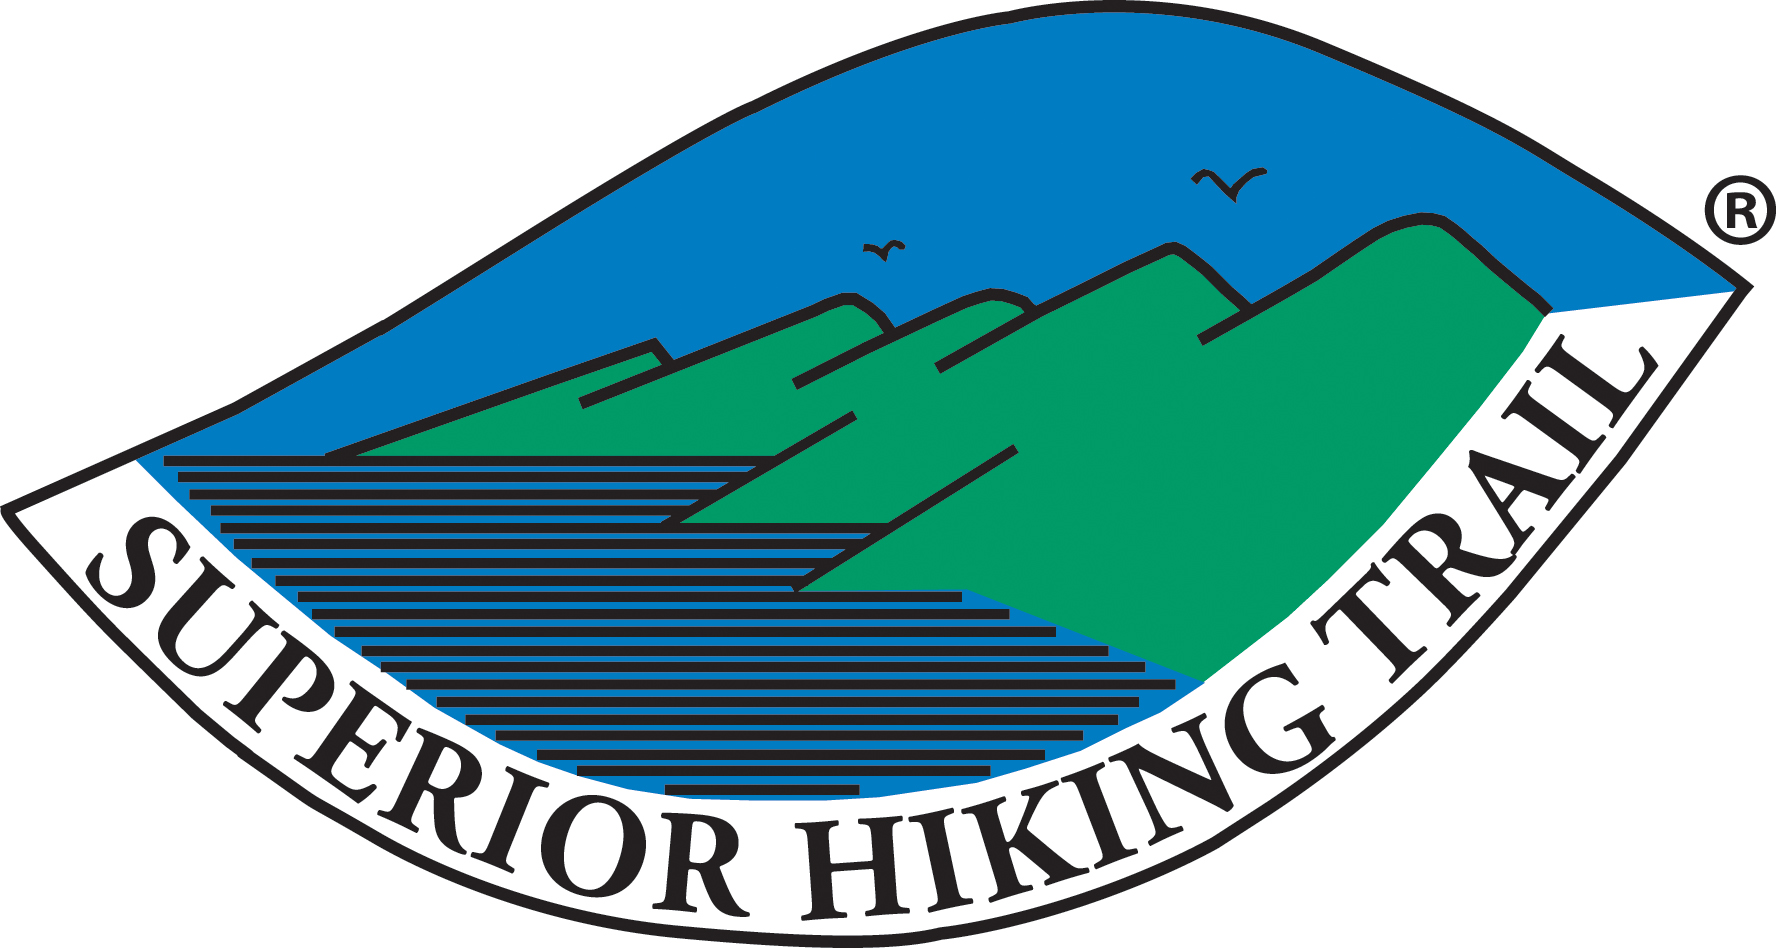 Logo of the Superior Hiking Trail featuring a stylized green and blue mountain range with two small birds flying in the sky above. The words "Superior Hiking Trail" are written in bold, black letters along the curved bottom edge of the logo—a perfect symbol for your next adventure after enjoying coffee in Duluth.